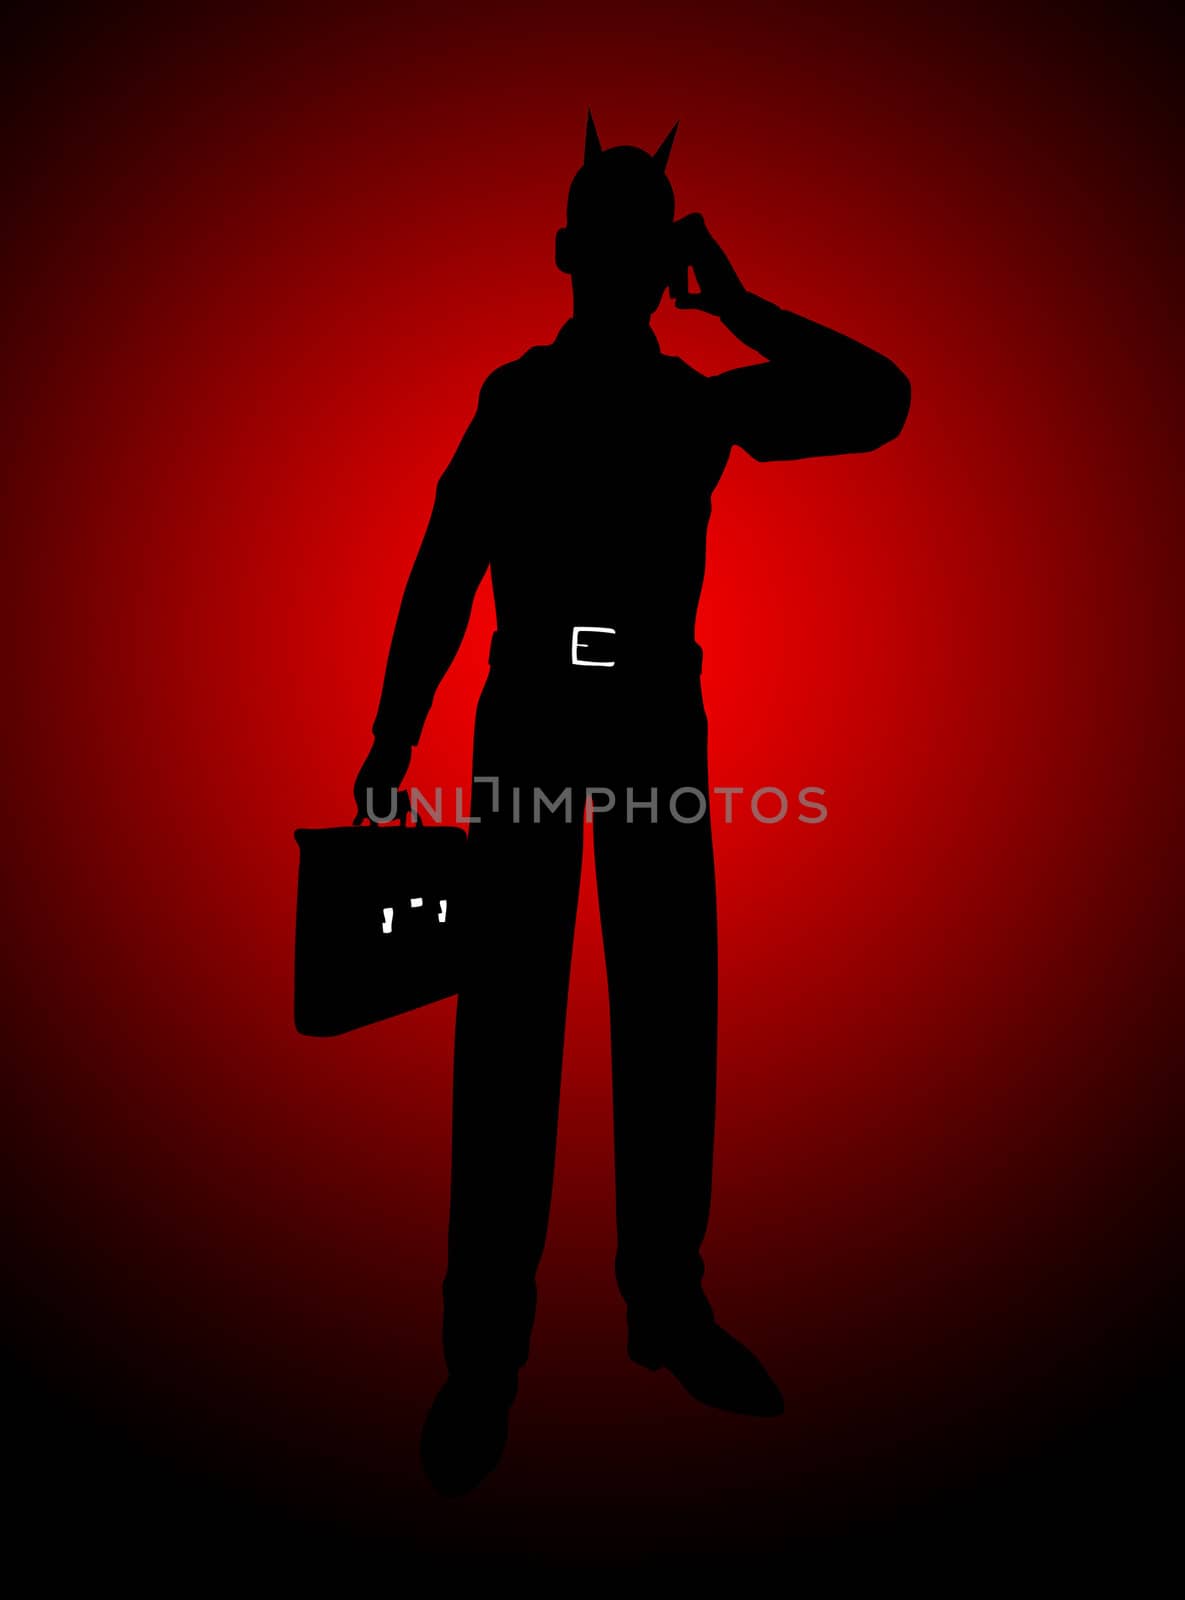 Concept image showing a silhouetted devil businessman.